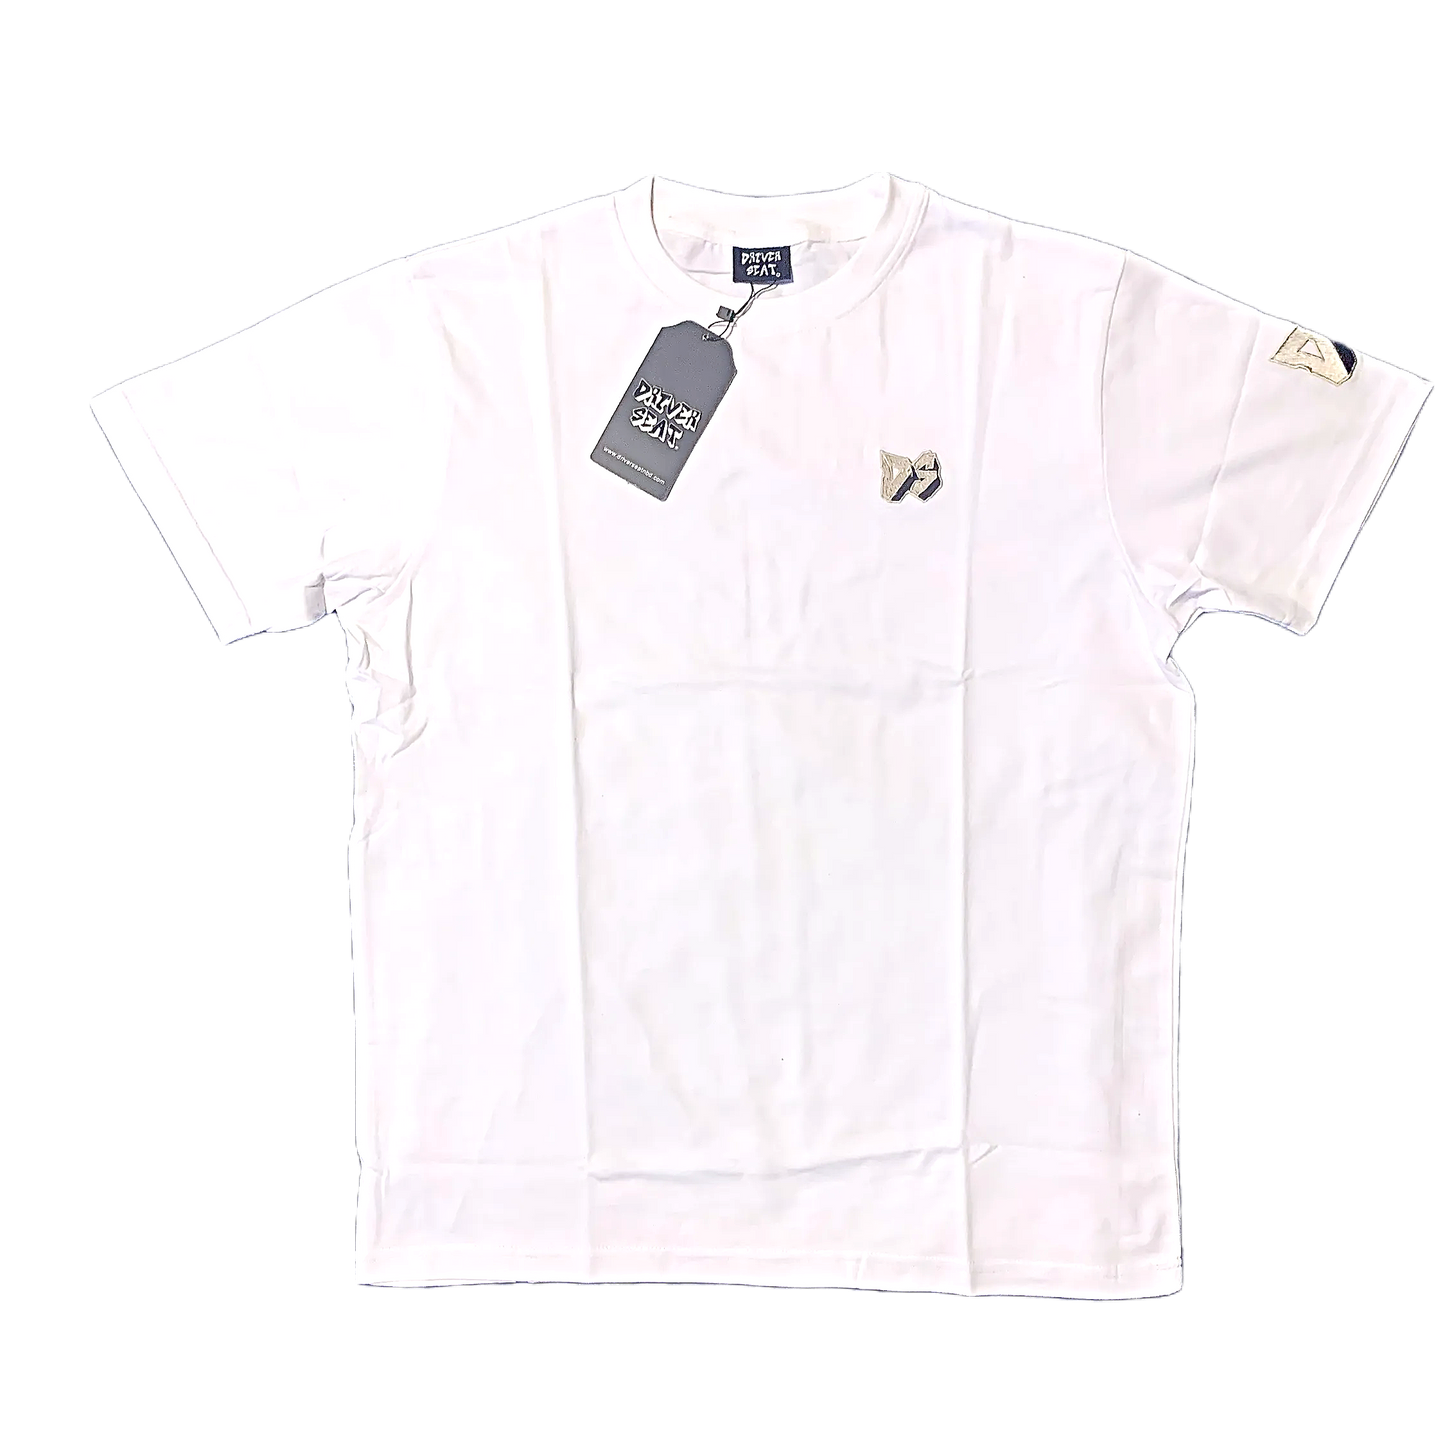 Essential White Tee (2 pack)